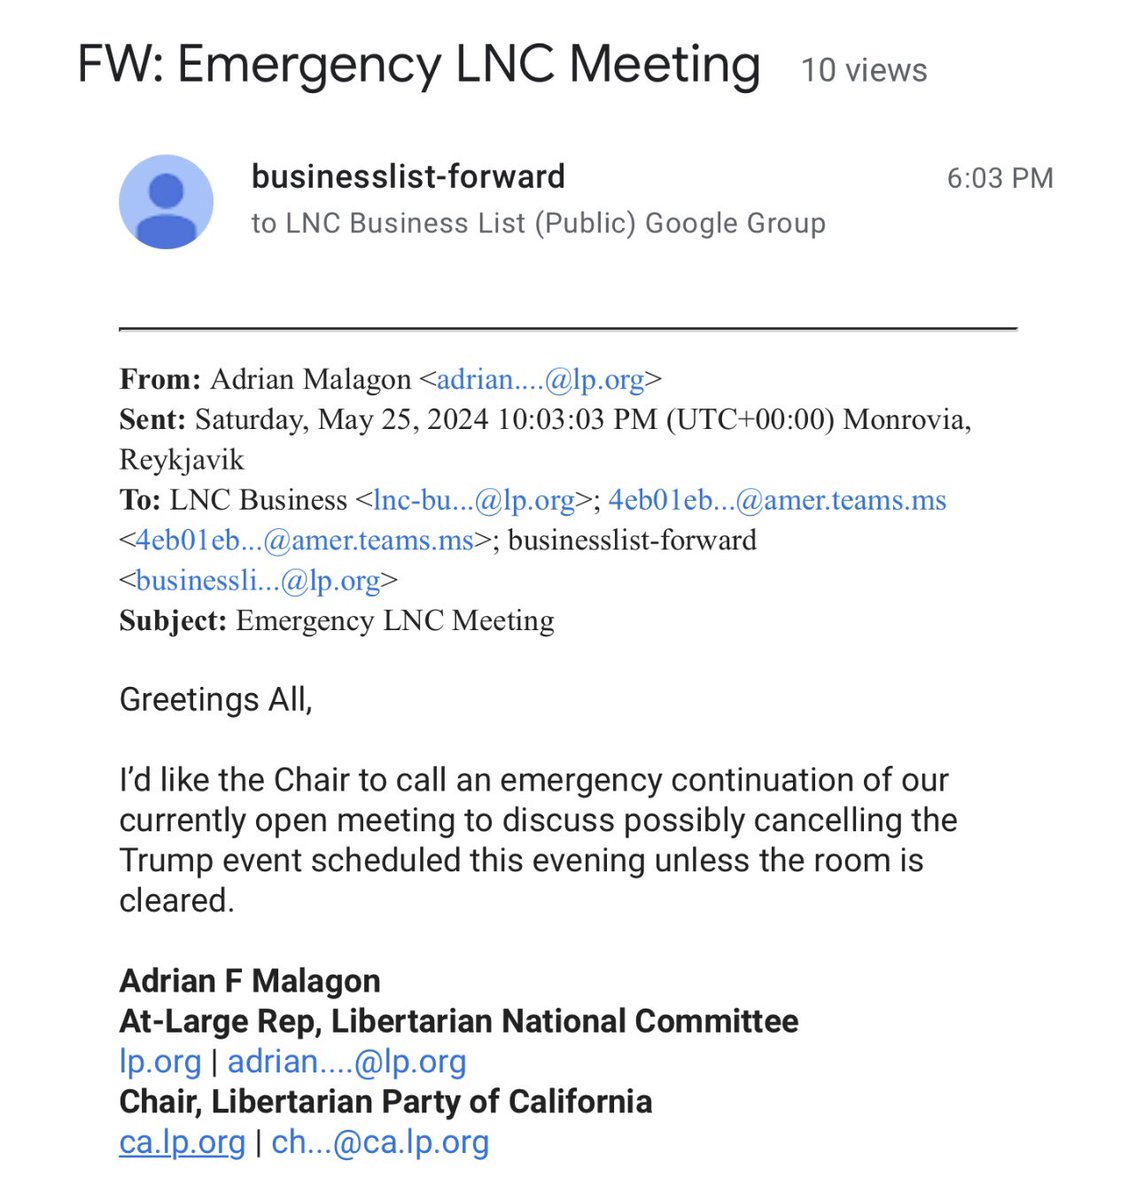 An email addressed from an at-large member of the Libertarian National Committee sent at 6:03pm appears to suggest an emergency meeting to consider cancelling the Trump event two hours before he’s scheduled to speak.